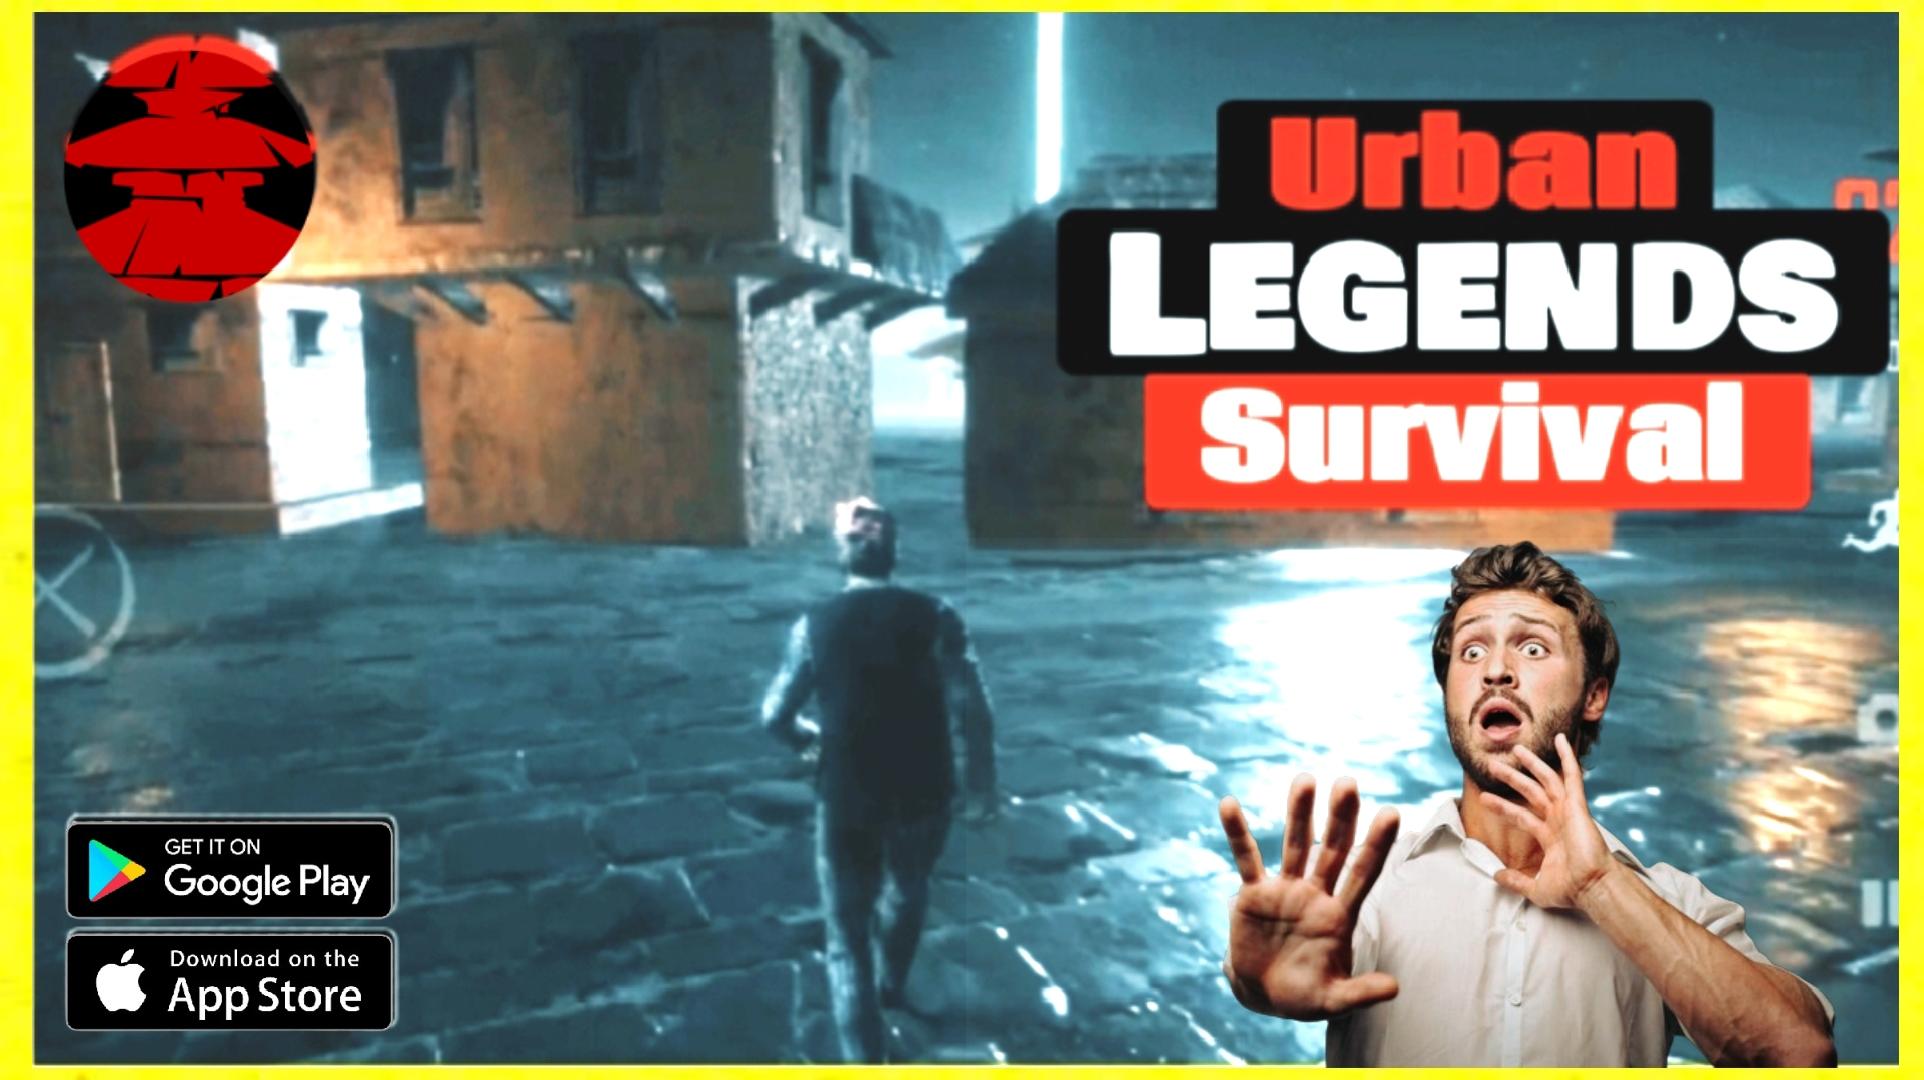 You have only 100 Second | Full HD Horror Gameplay (Android, iOS) Urban legends survival